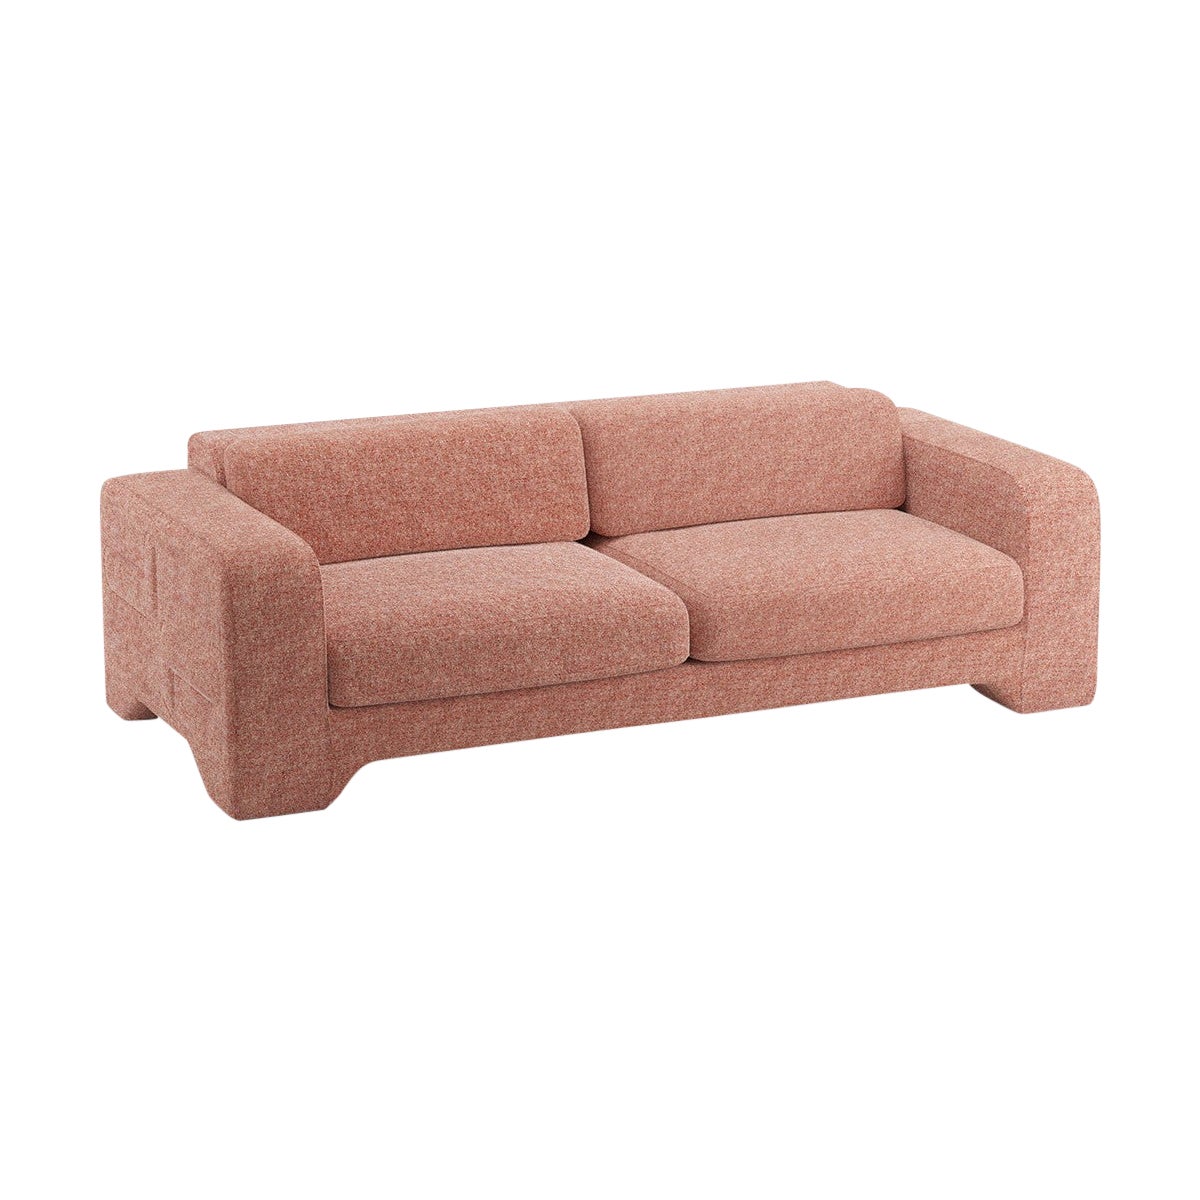 Popus Editions Giovanna 2.5 Seater Sofa in Marrakesh London Linen Fabric For Sale